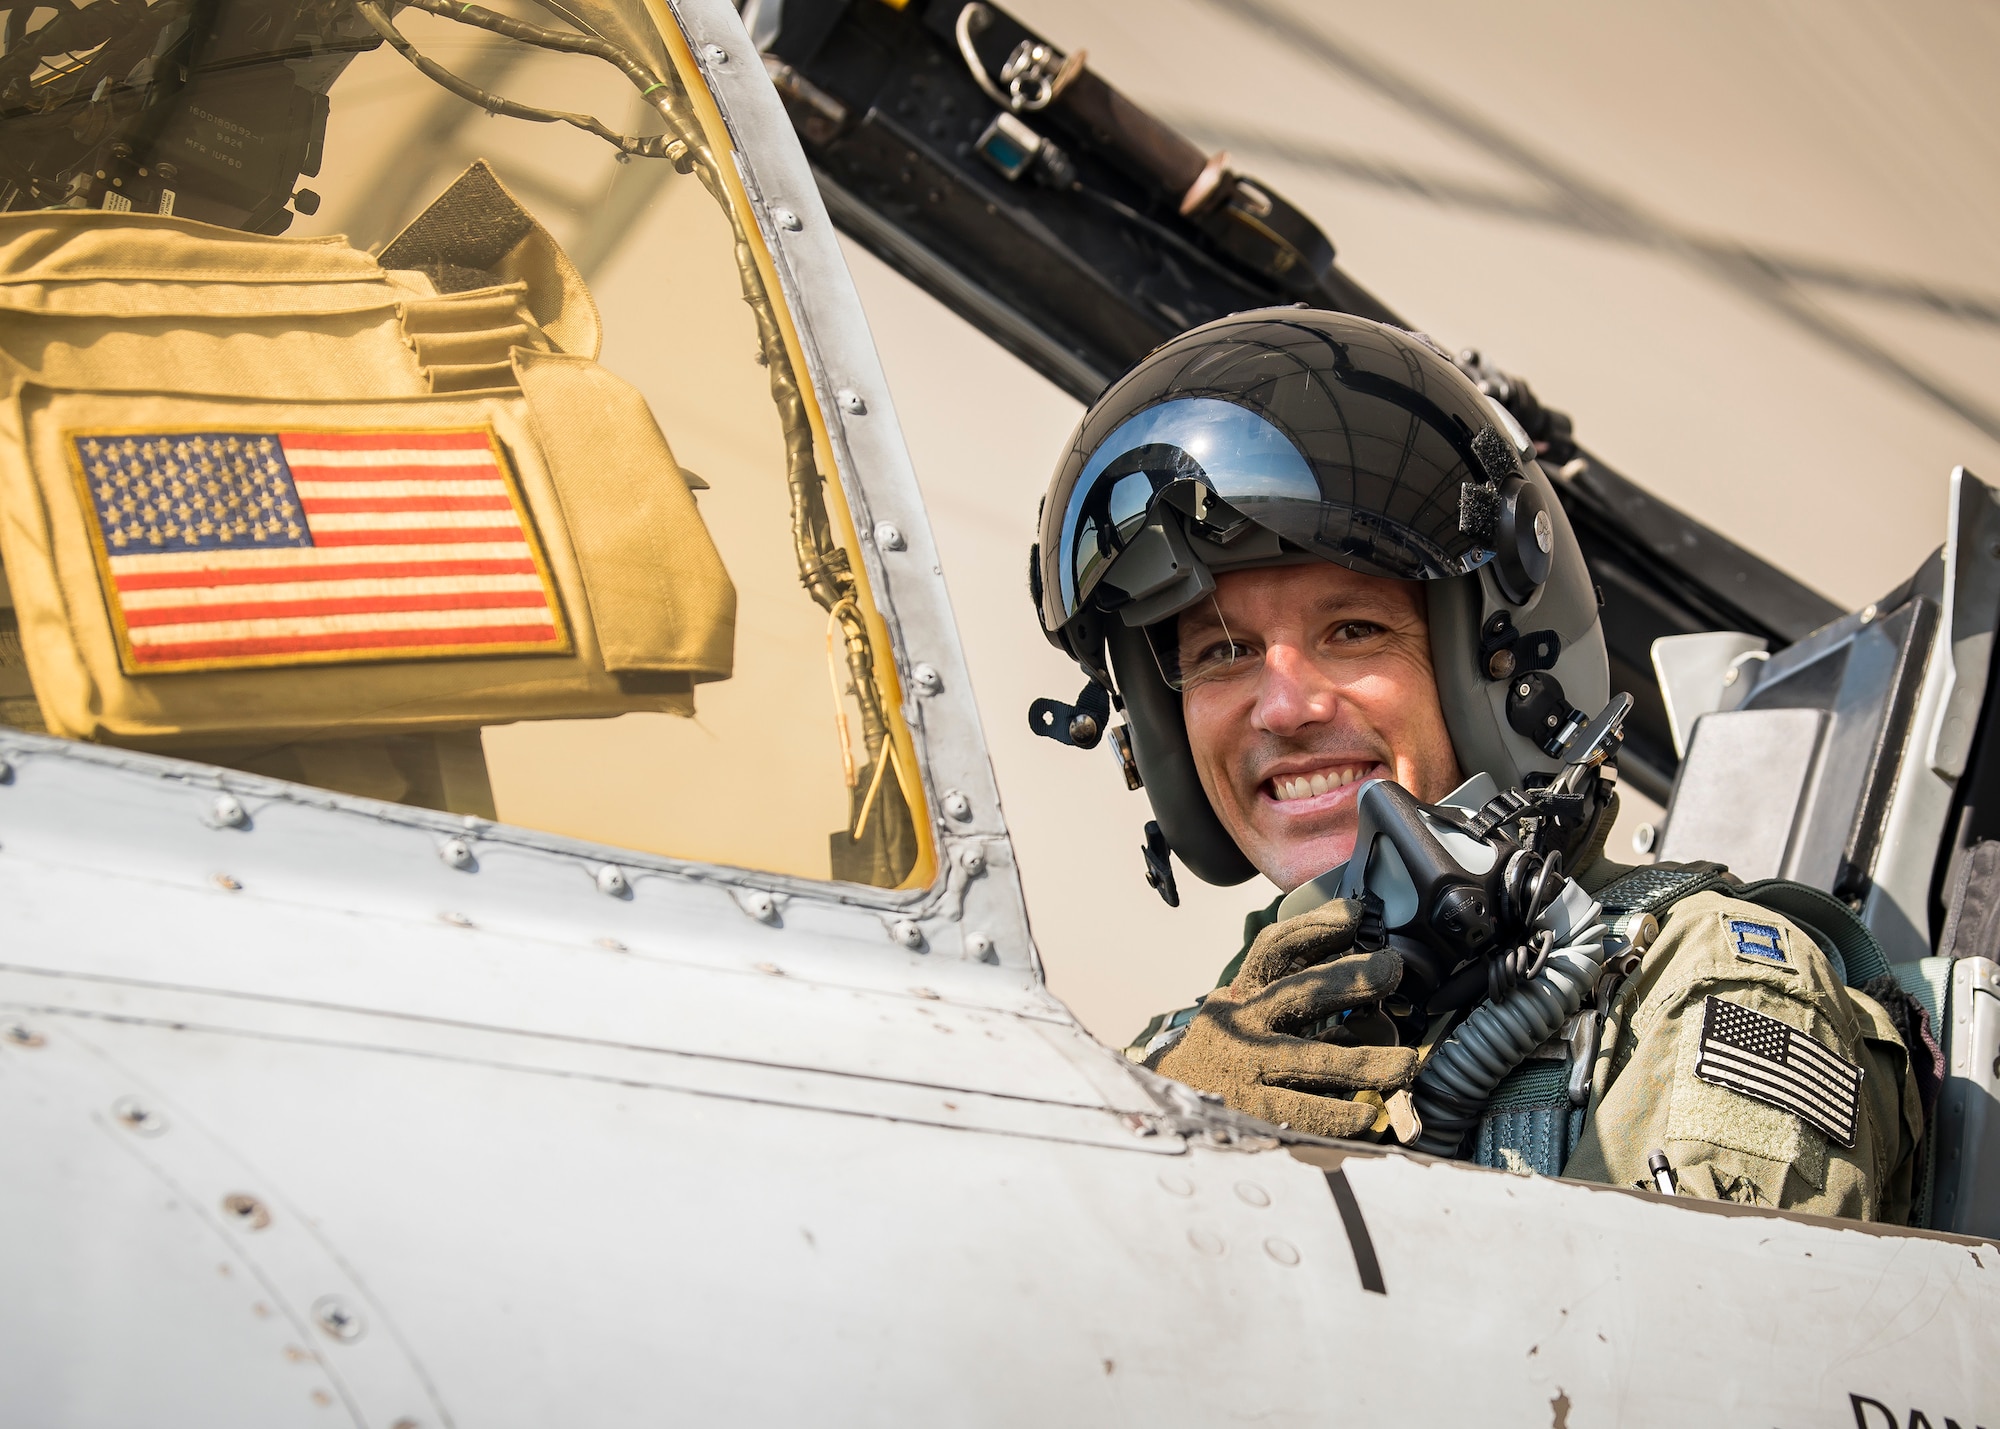 Capt. Robert Poe, 74th Fighter Squadron chief of safety and A-10C Thunderbolt II pilot, poses for a photo, June 28, 2019, at Moody Air Force Base, Ga. Poe is one of the few Airmen who have earned three different aviation badges. During his 15-year career, Poe earned his enlisted aircrew wings as a boom operator for KC-135 Stratotankers, then commissioned as a navigator for the U-28A aircraft and earned his combat systems officer badge. In 2013 he cross-trained to earn his pilot wings and become an A-10 pilot. (U.S. Air Force photo by Airman 1st Class Eugene Oliver)